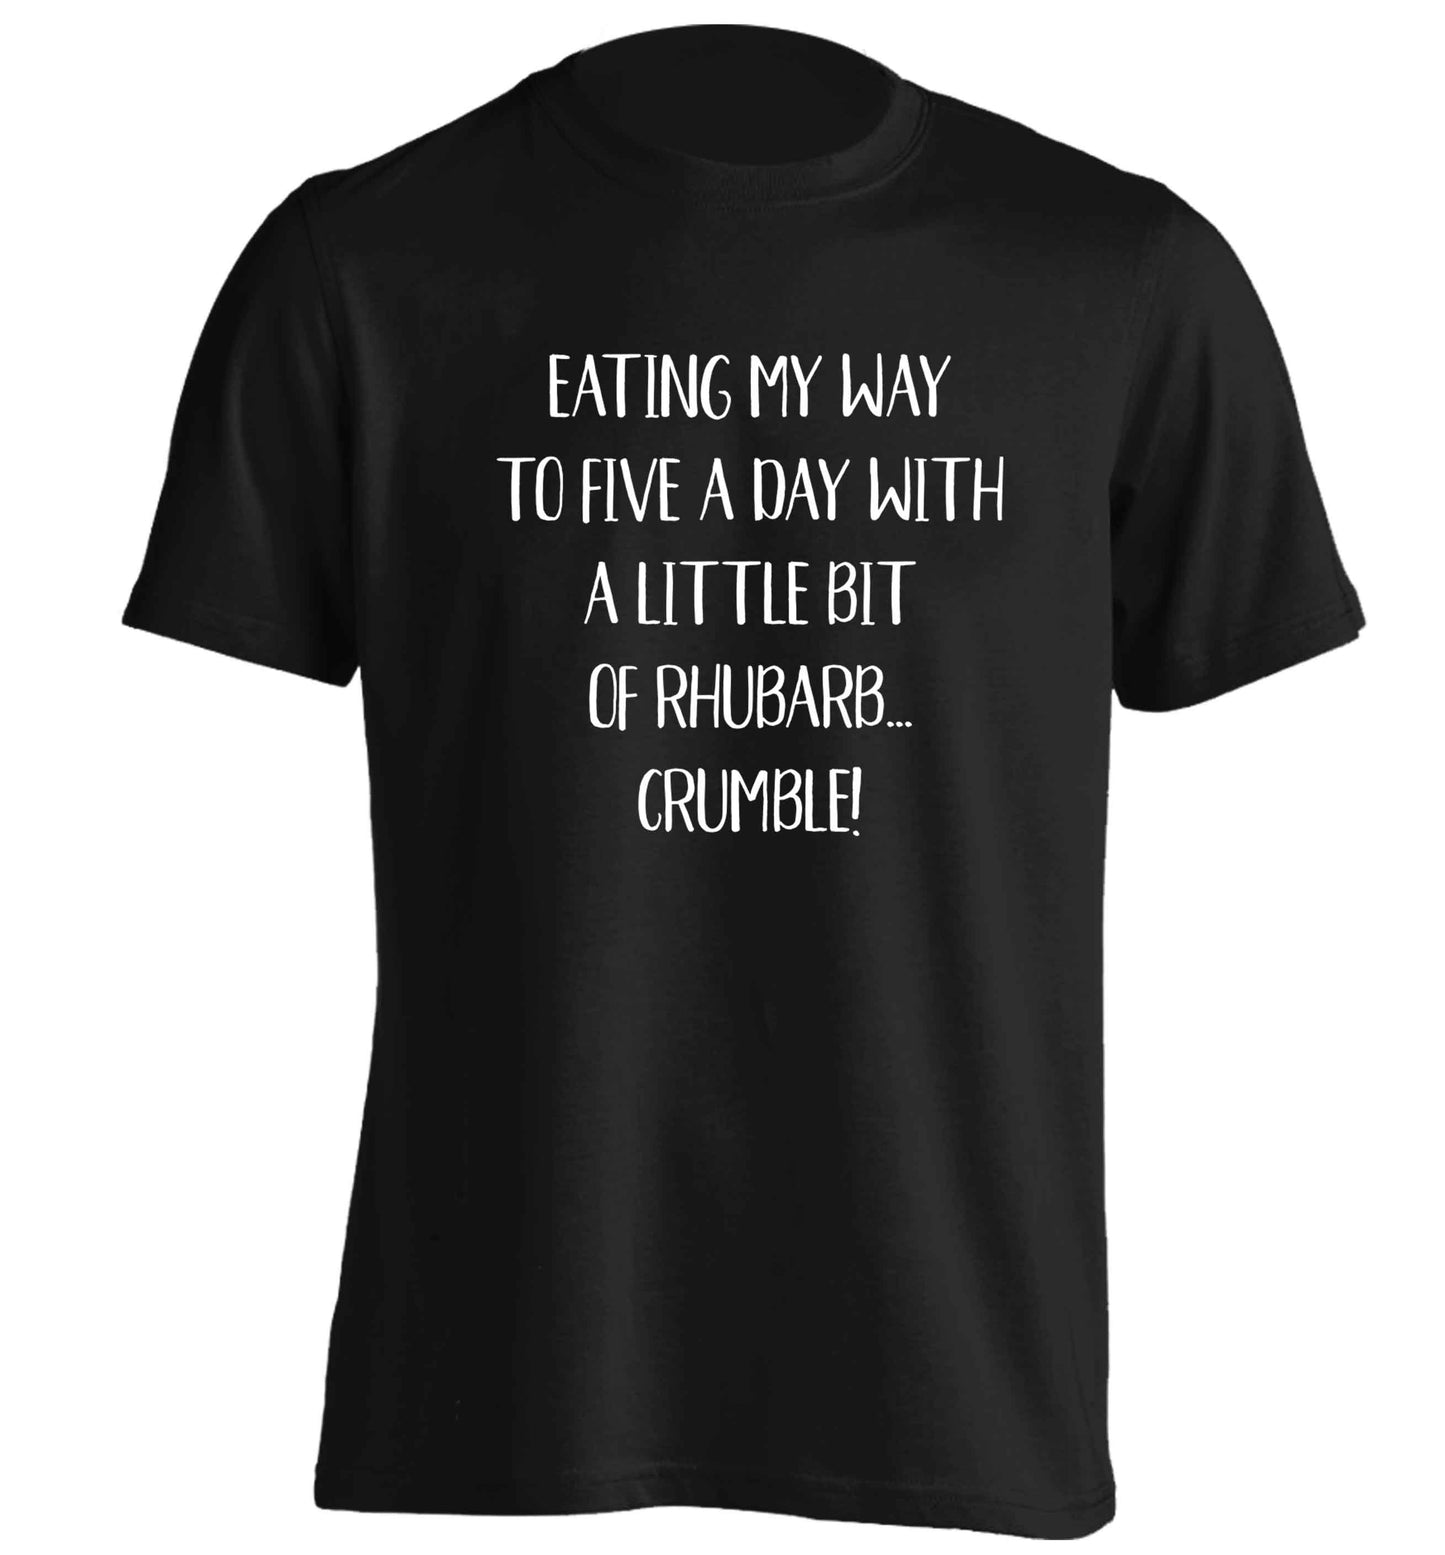 Eating my way to five a day with a little bit of rhubarb crumble adults unisex black Tshirt 2XL